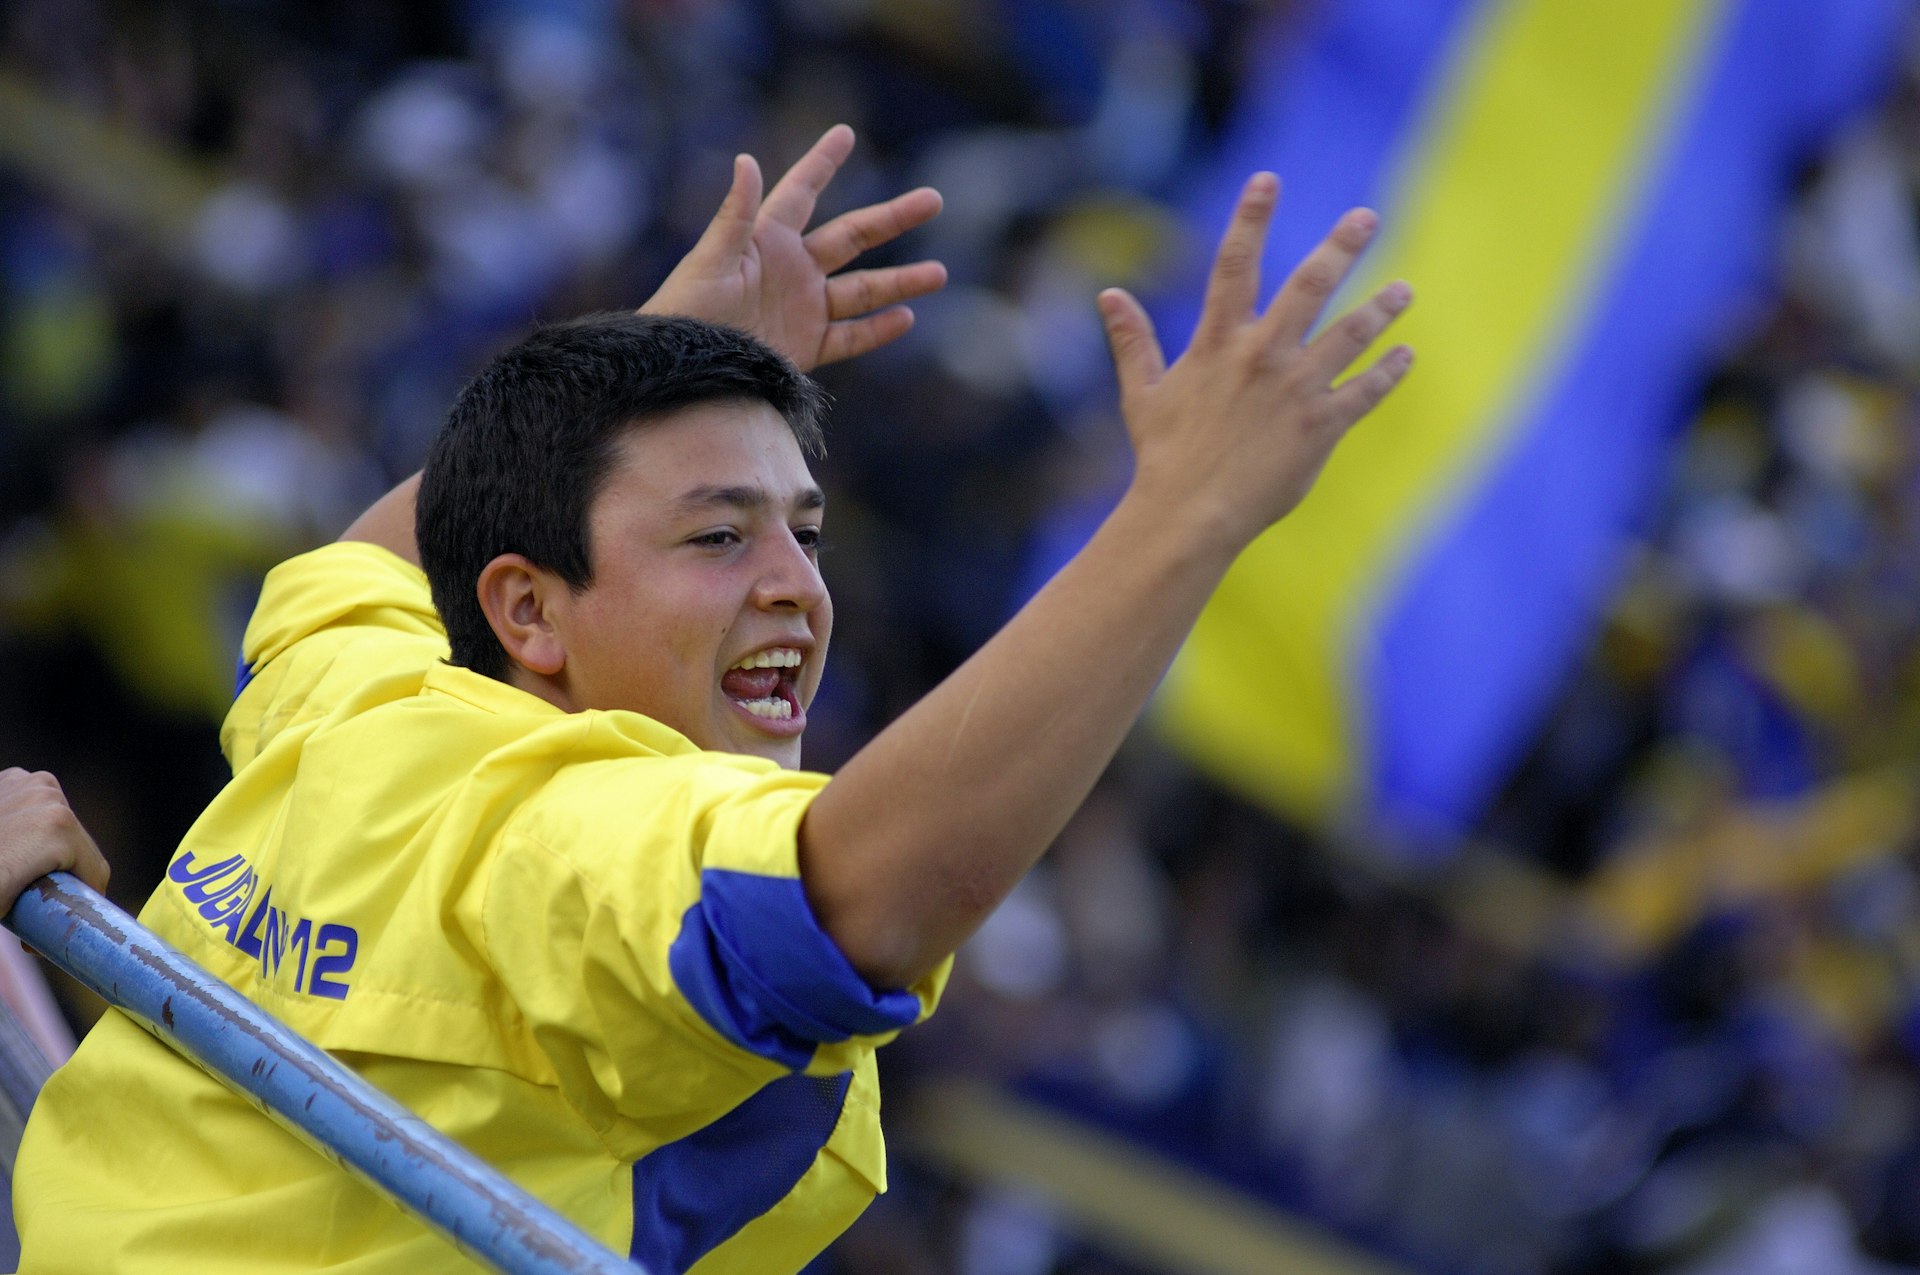 A teenager wearing the yellow and blue colors of the Boca Juniors team is raising his arms and cheering at a soccer match in Buenos Aires, Argentina